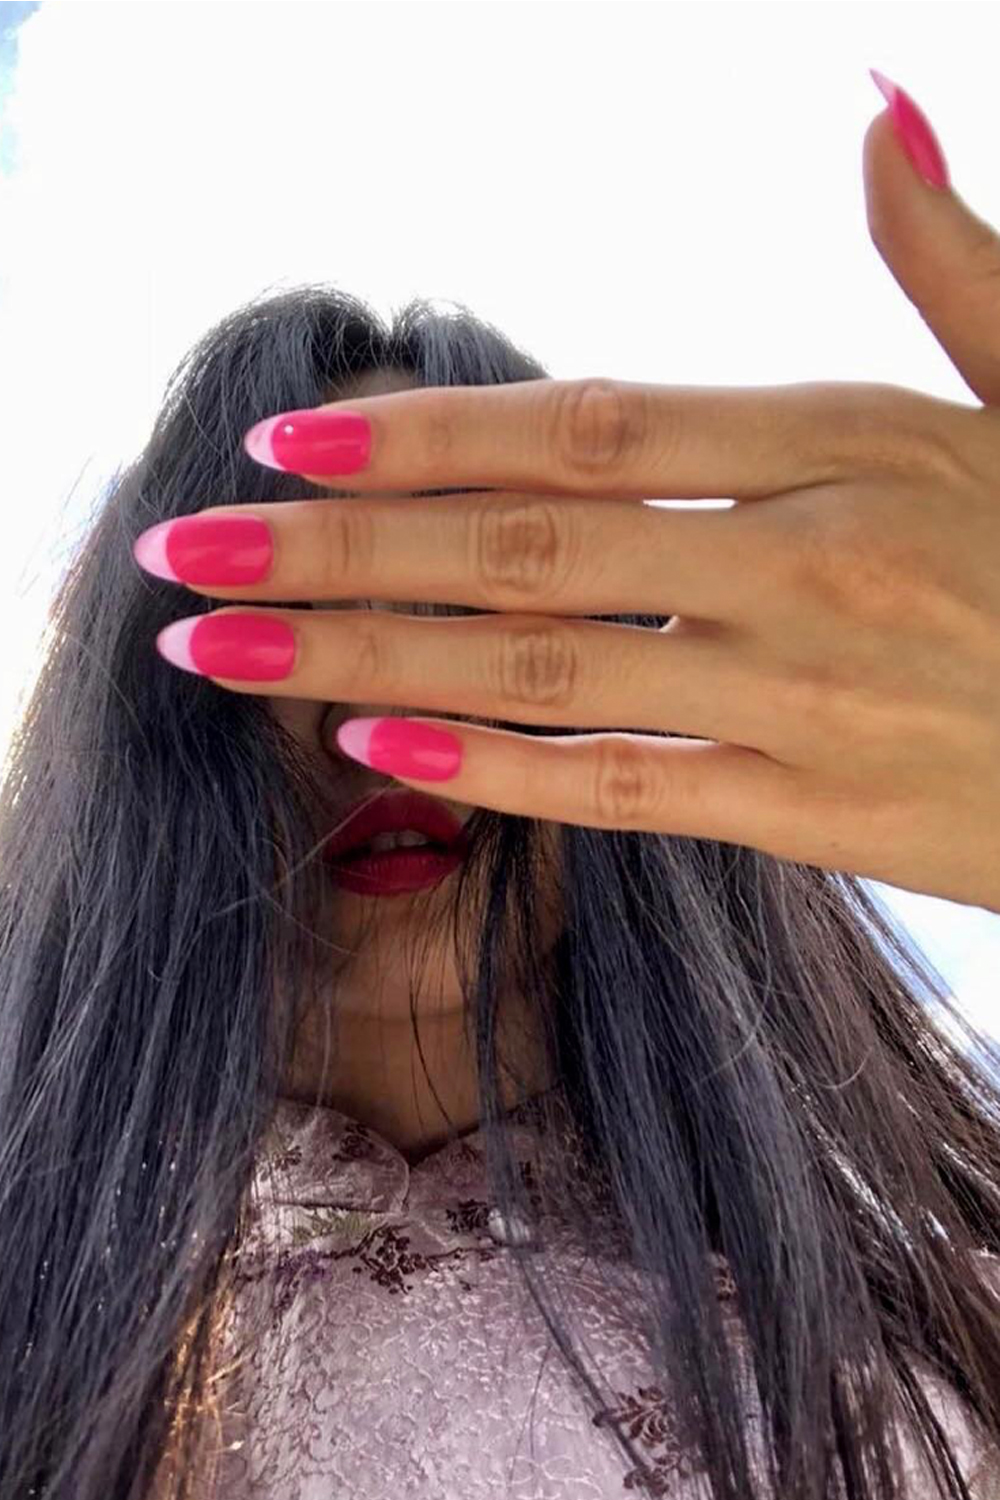 These Are the Only 2021 Nail Trends You Need to Know